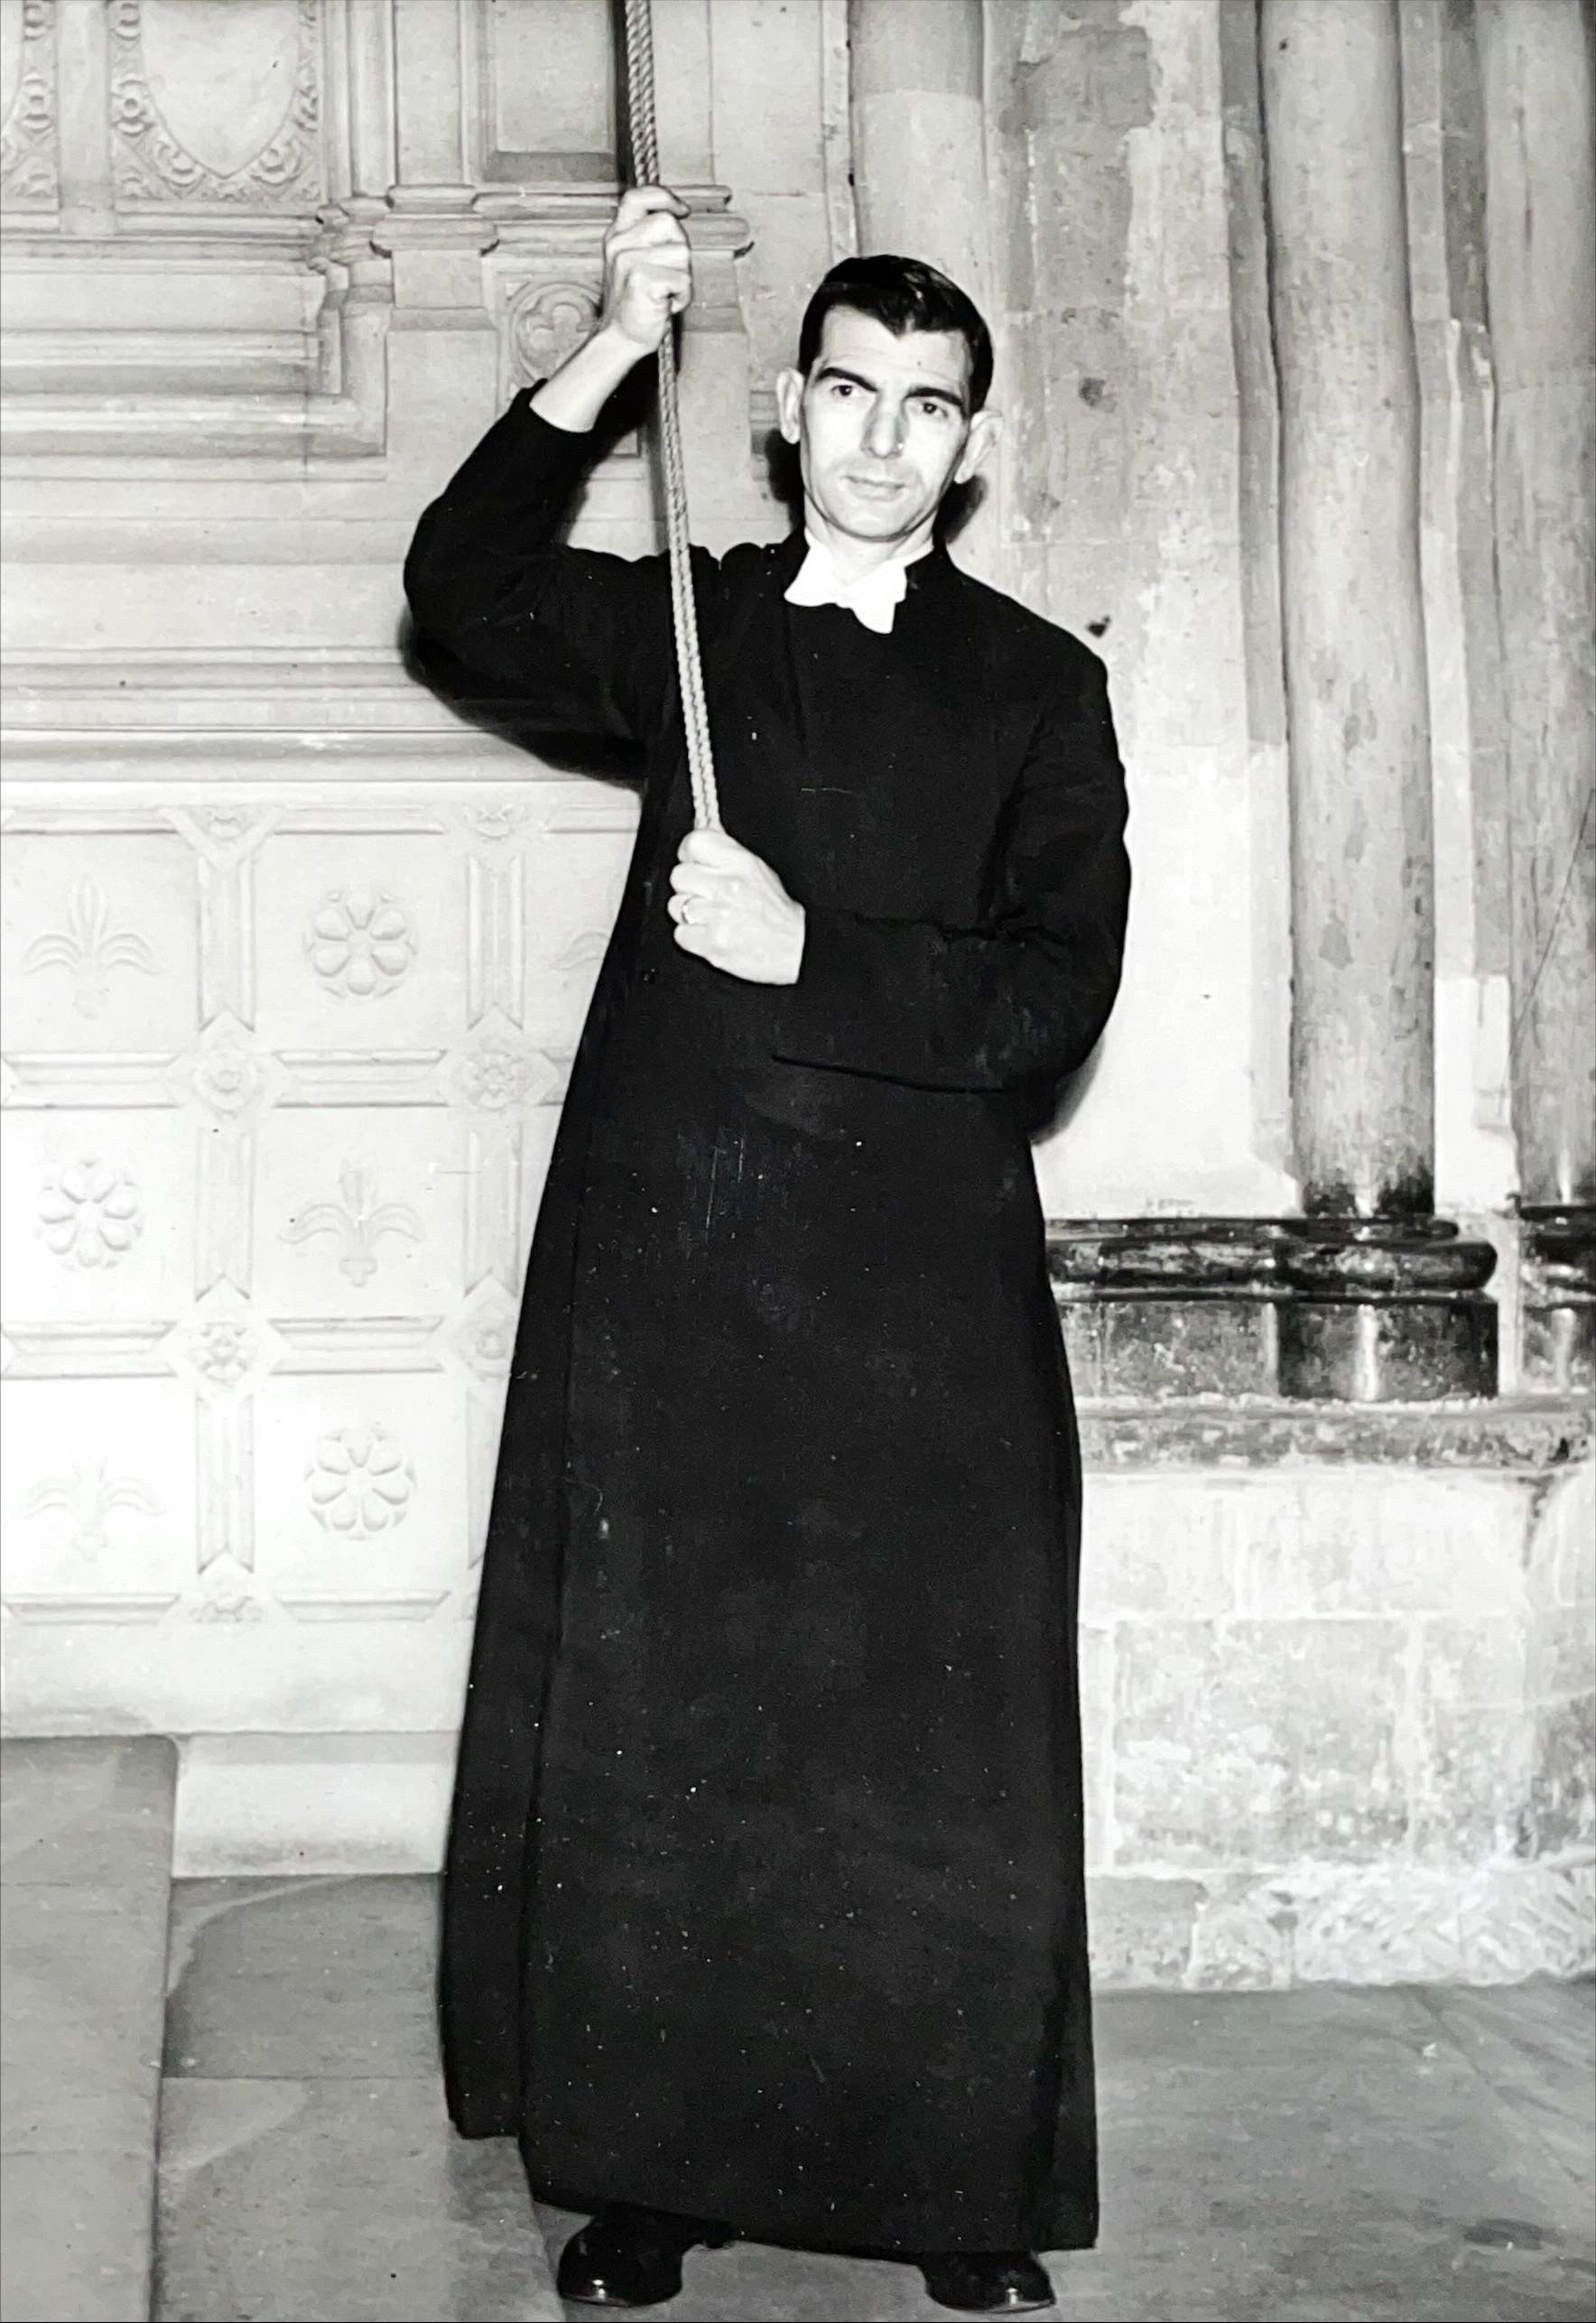 The Head Verger, F. C. Bliss tolled the 30-cwt. tenor bell fifty six times on the King's death, February 1952